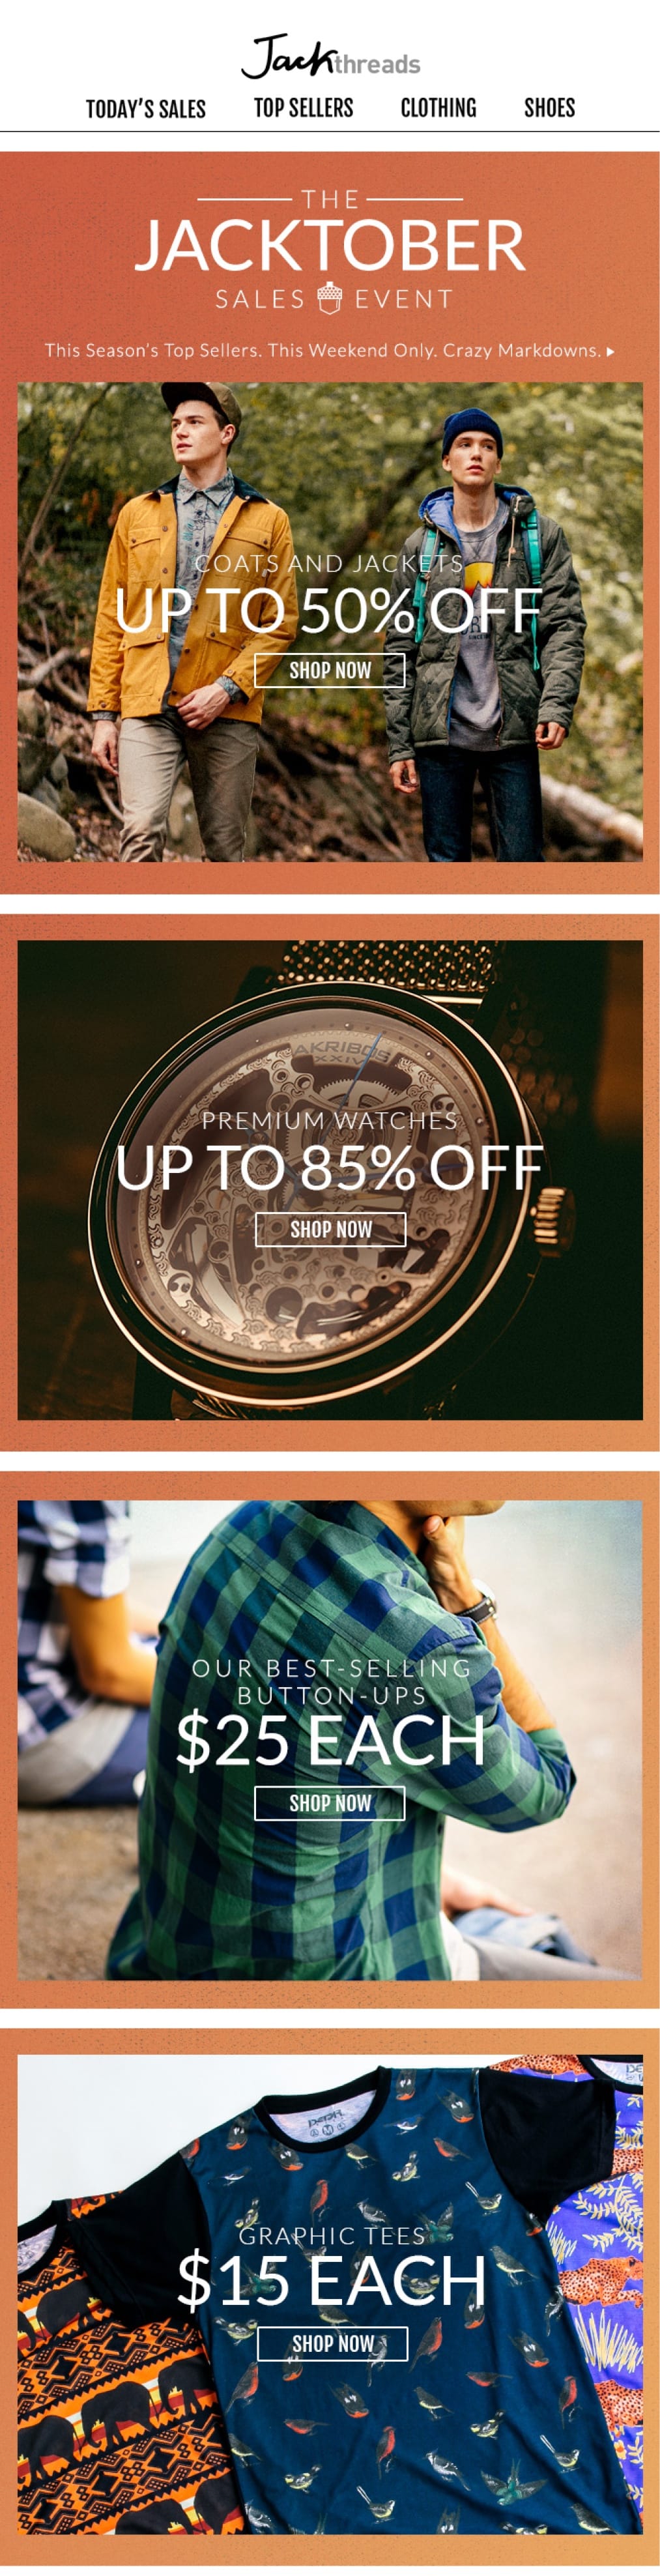 email example jackthreads (sale email)